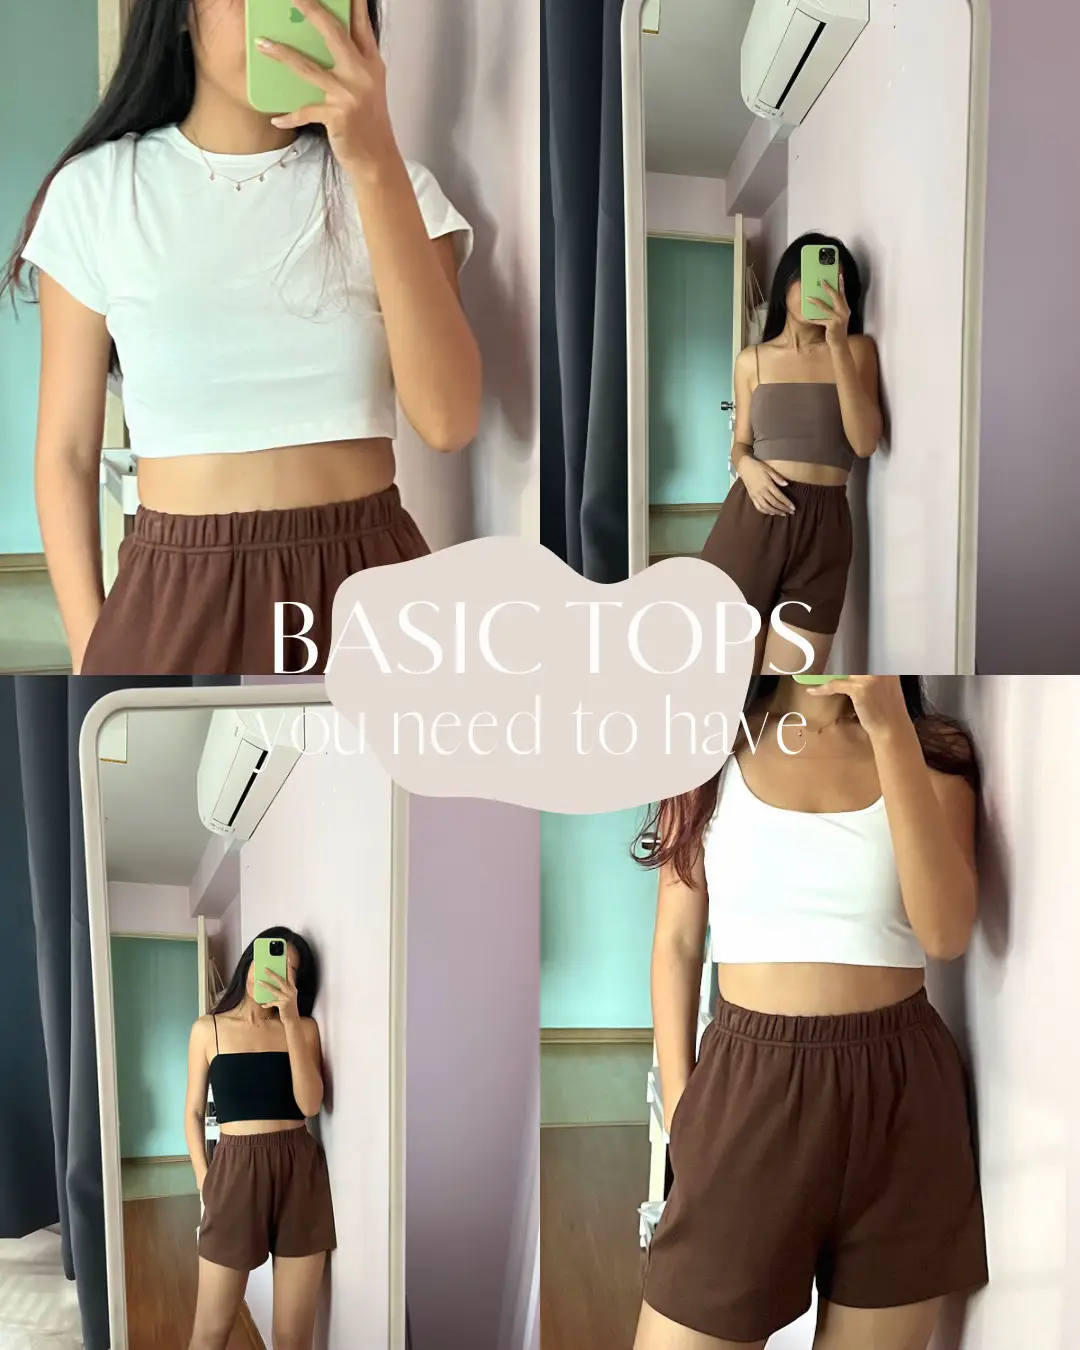 CROPPED TUBE PADDED TOP (EMERALD)